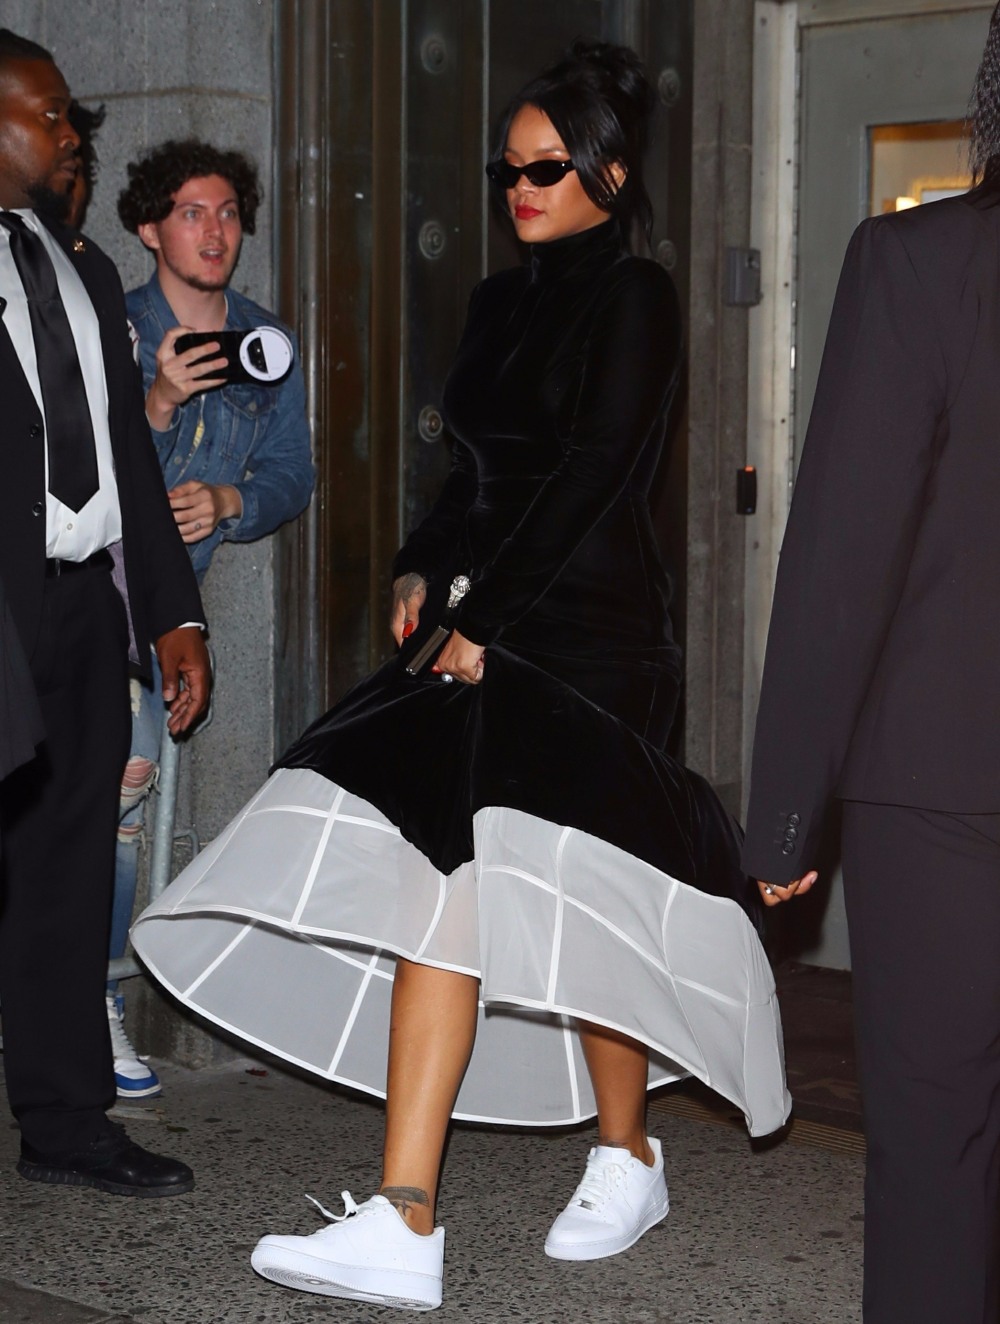 Rihanna stuns in Nike Air Force sneakers and an elegant gown as she leaves her annual Diamond Ball in NYC!